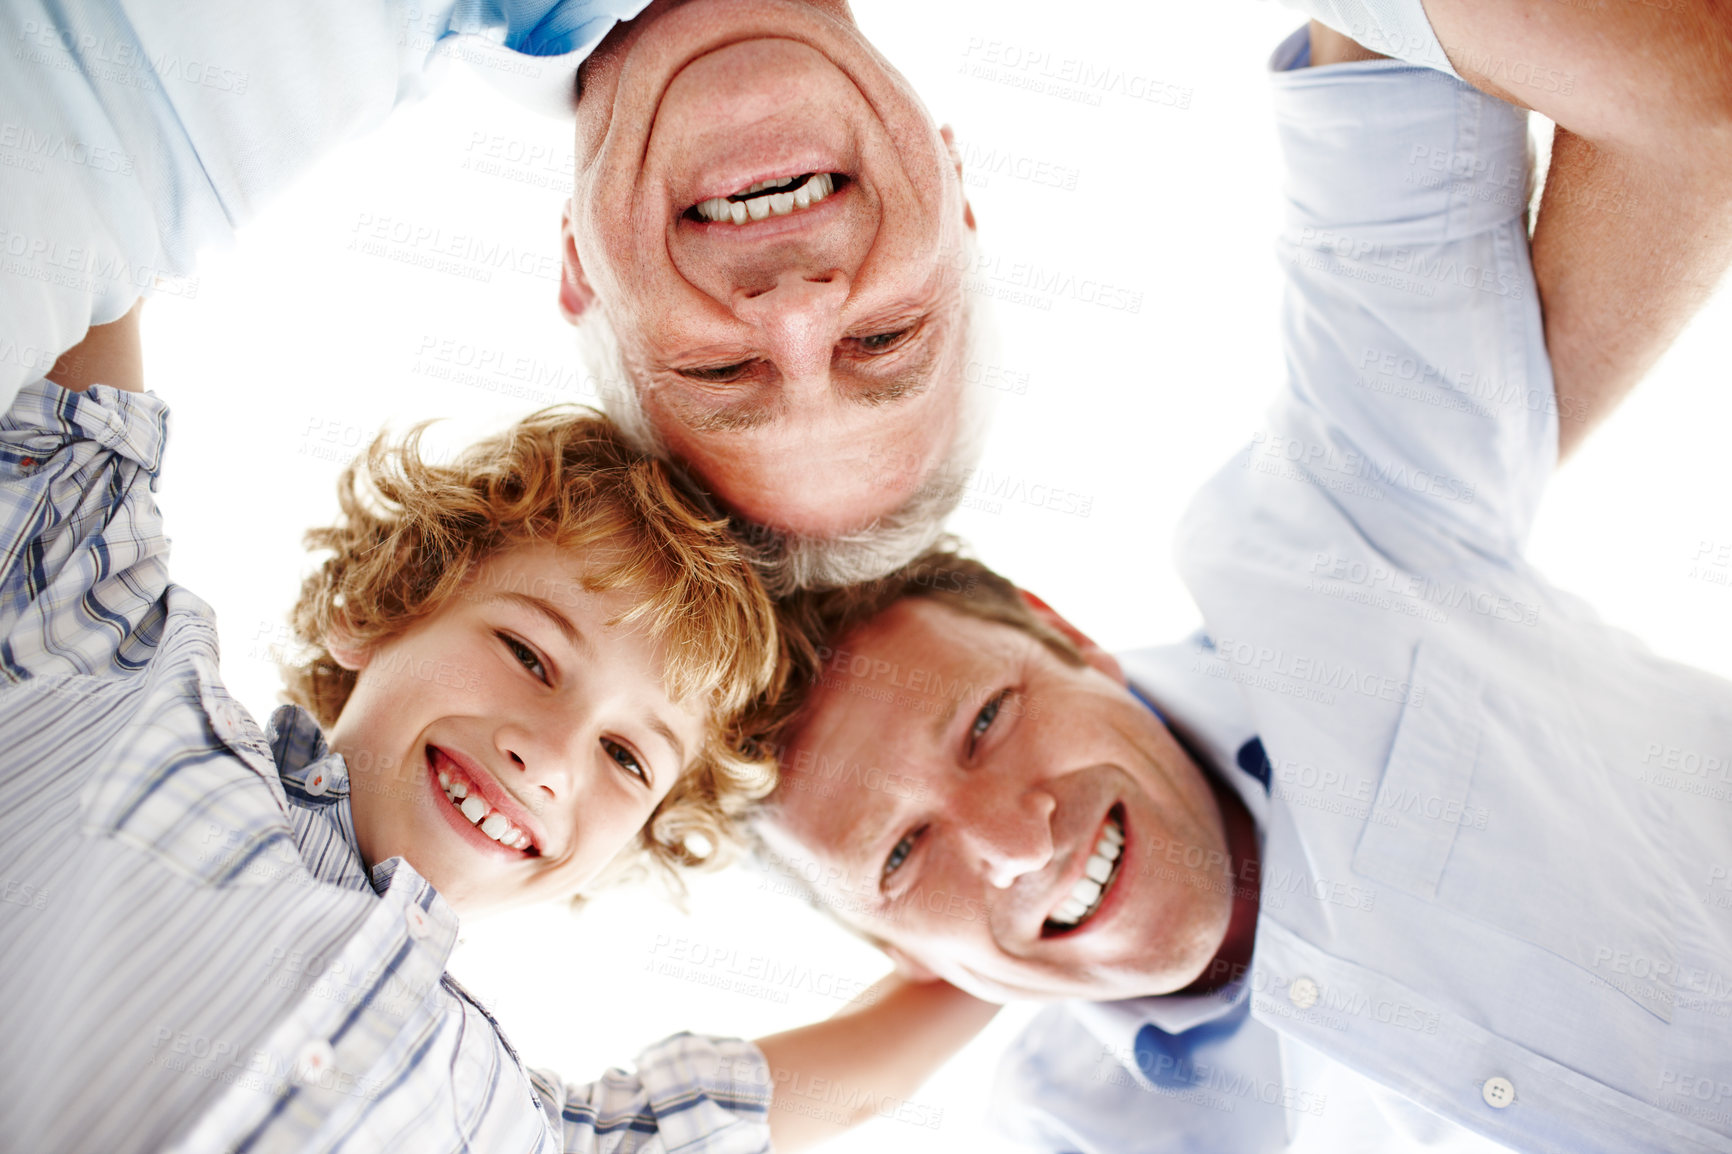 Buy stock photo Low angle portrait of a handsome man standing with his father and his son